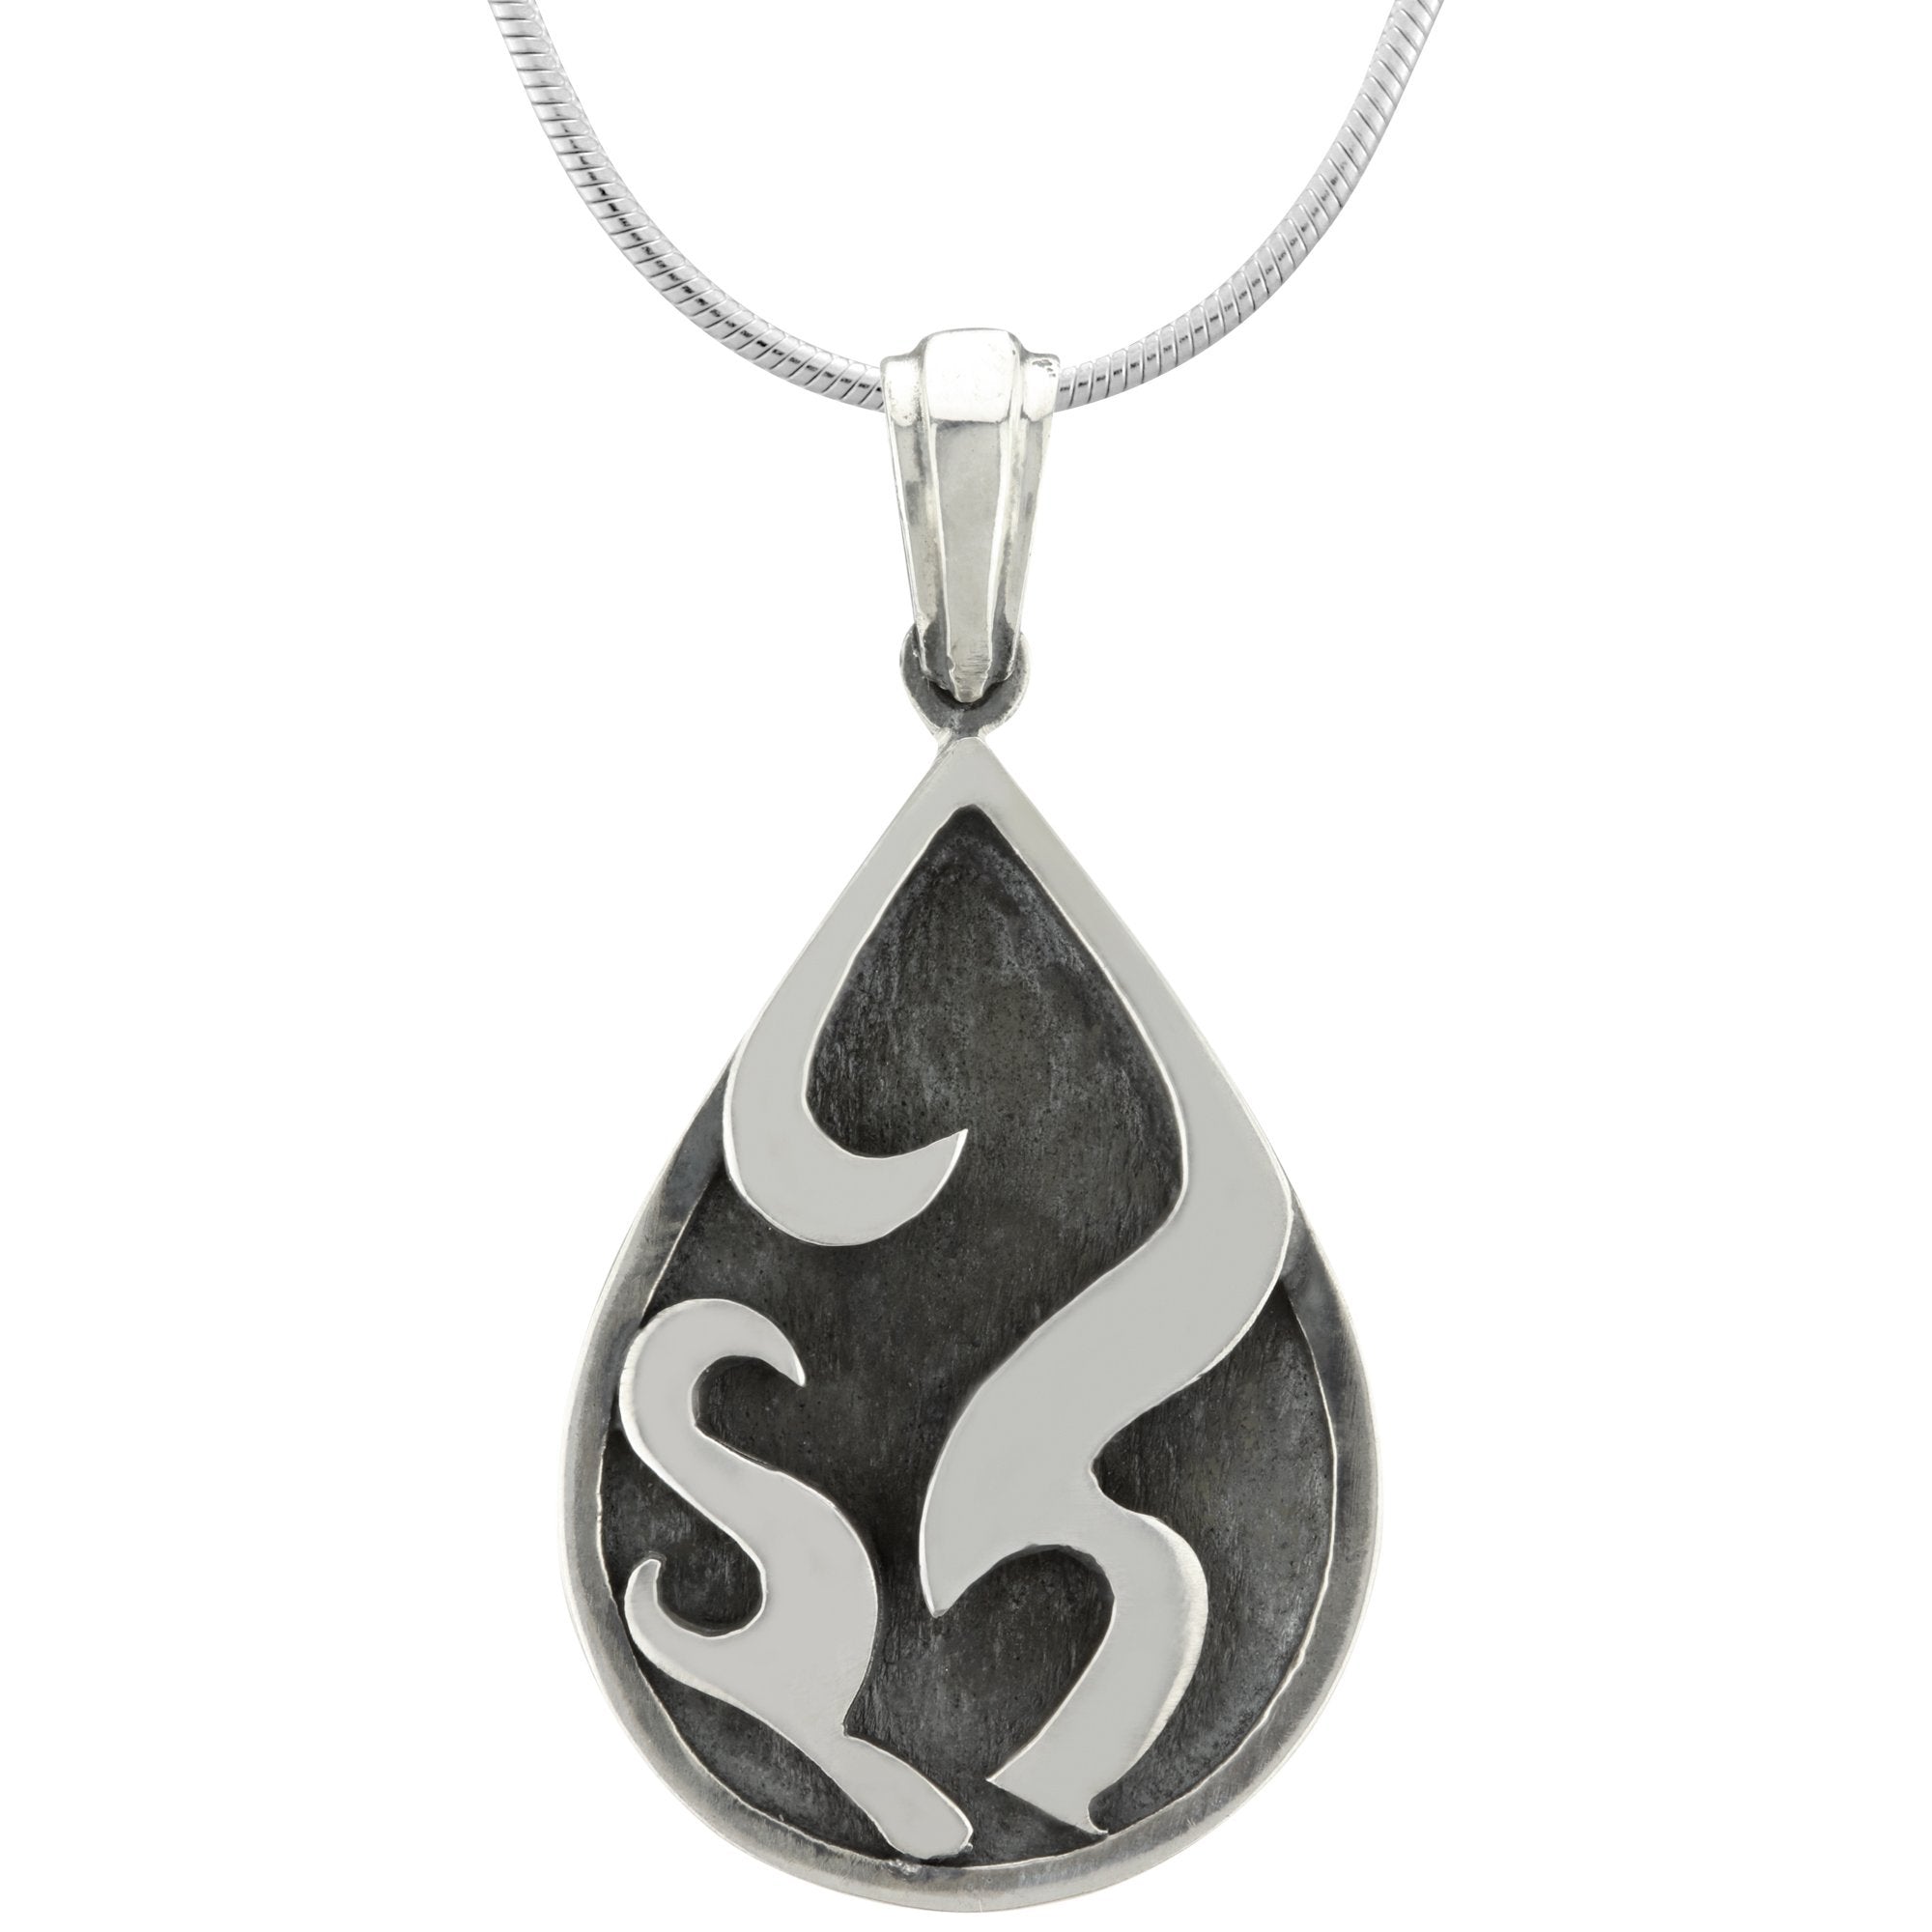 Flames Drop Sterling Necklace - With Diamond Cut Chain